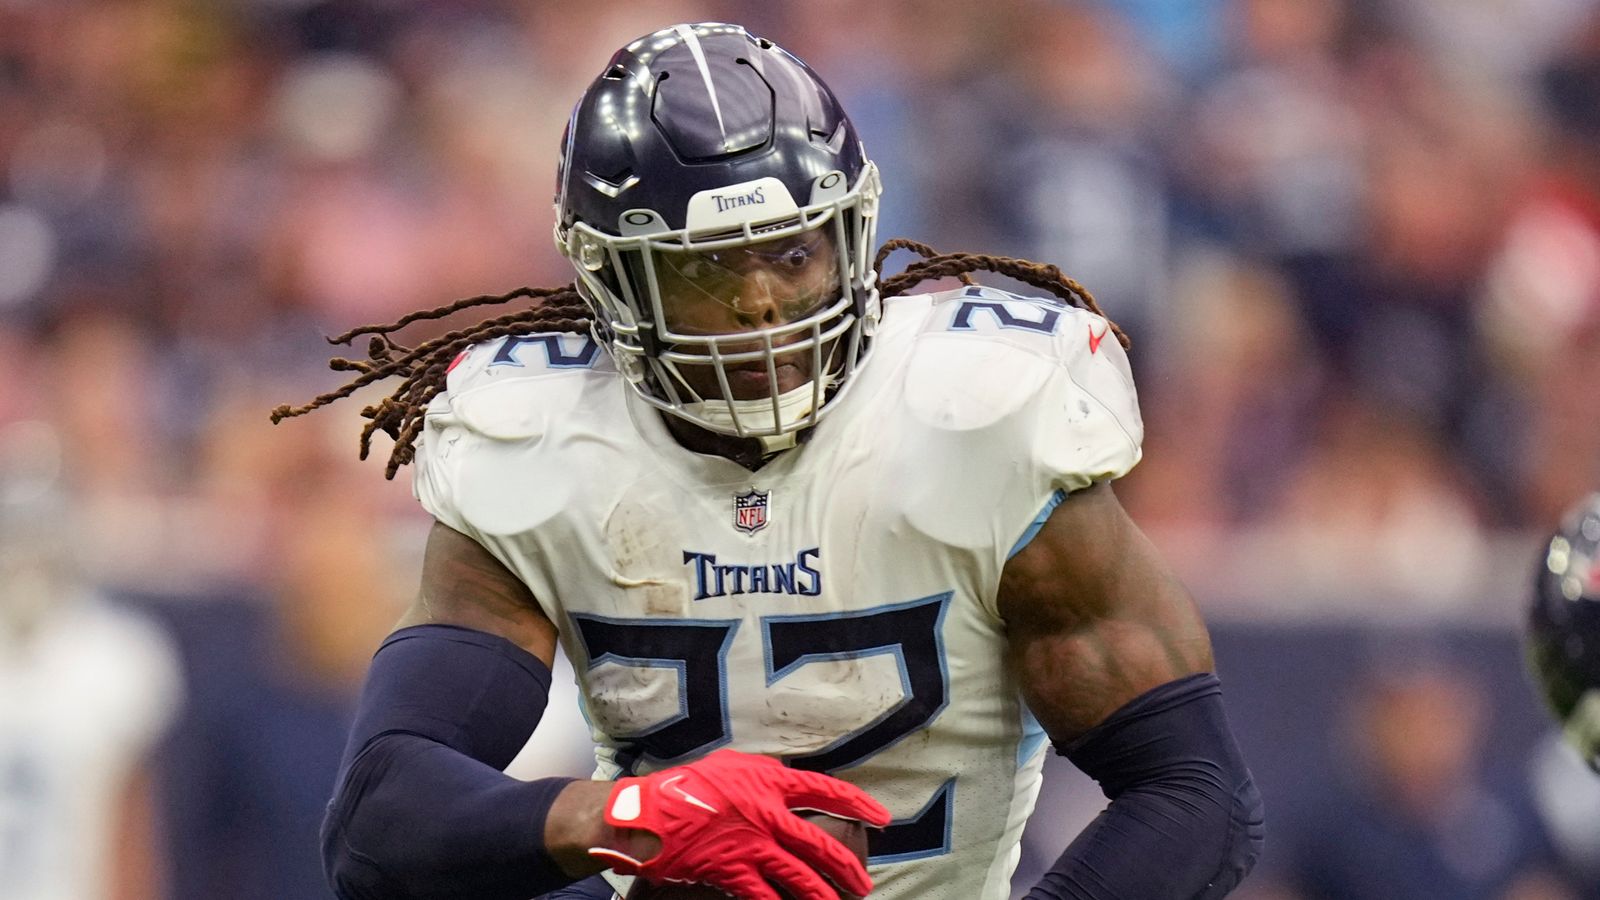 Derrick Henry scores second touchdown to give Titans 28-21 lead - NBC Sports